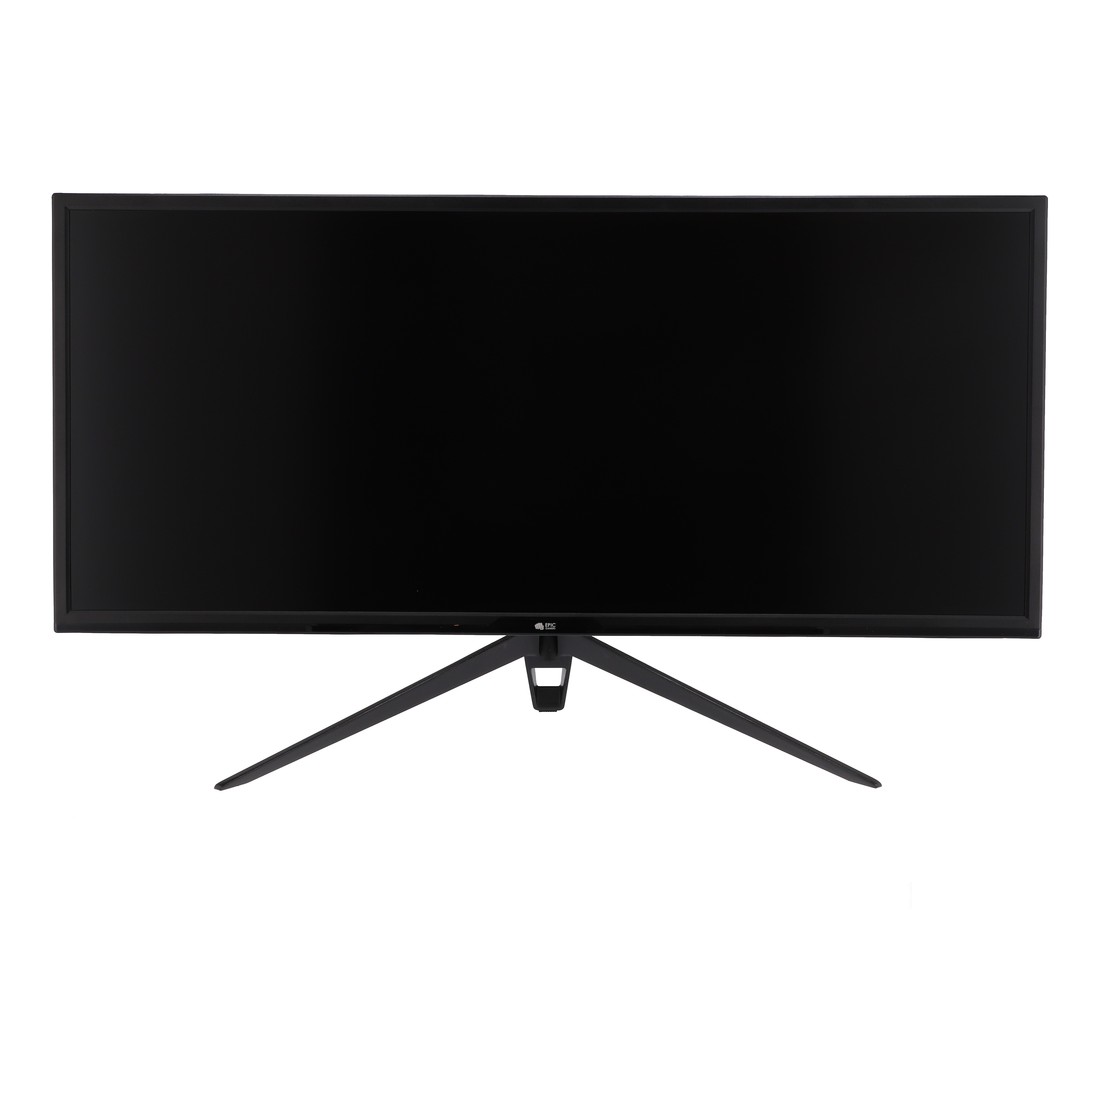 Epic Gamers 34-inch FHD/100Hz Flat Gaming Monitor